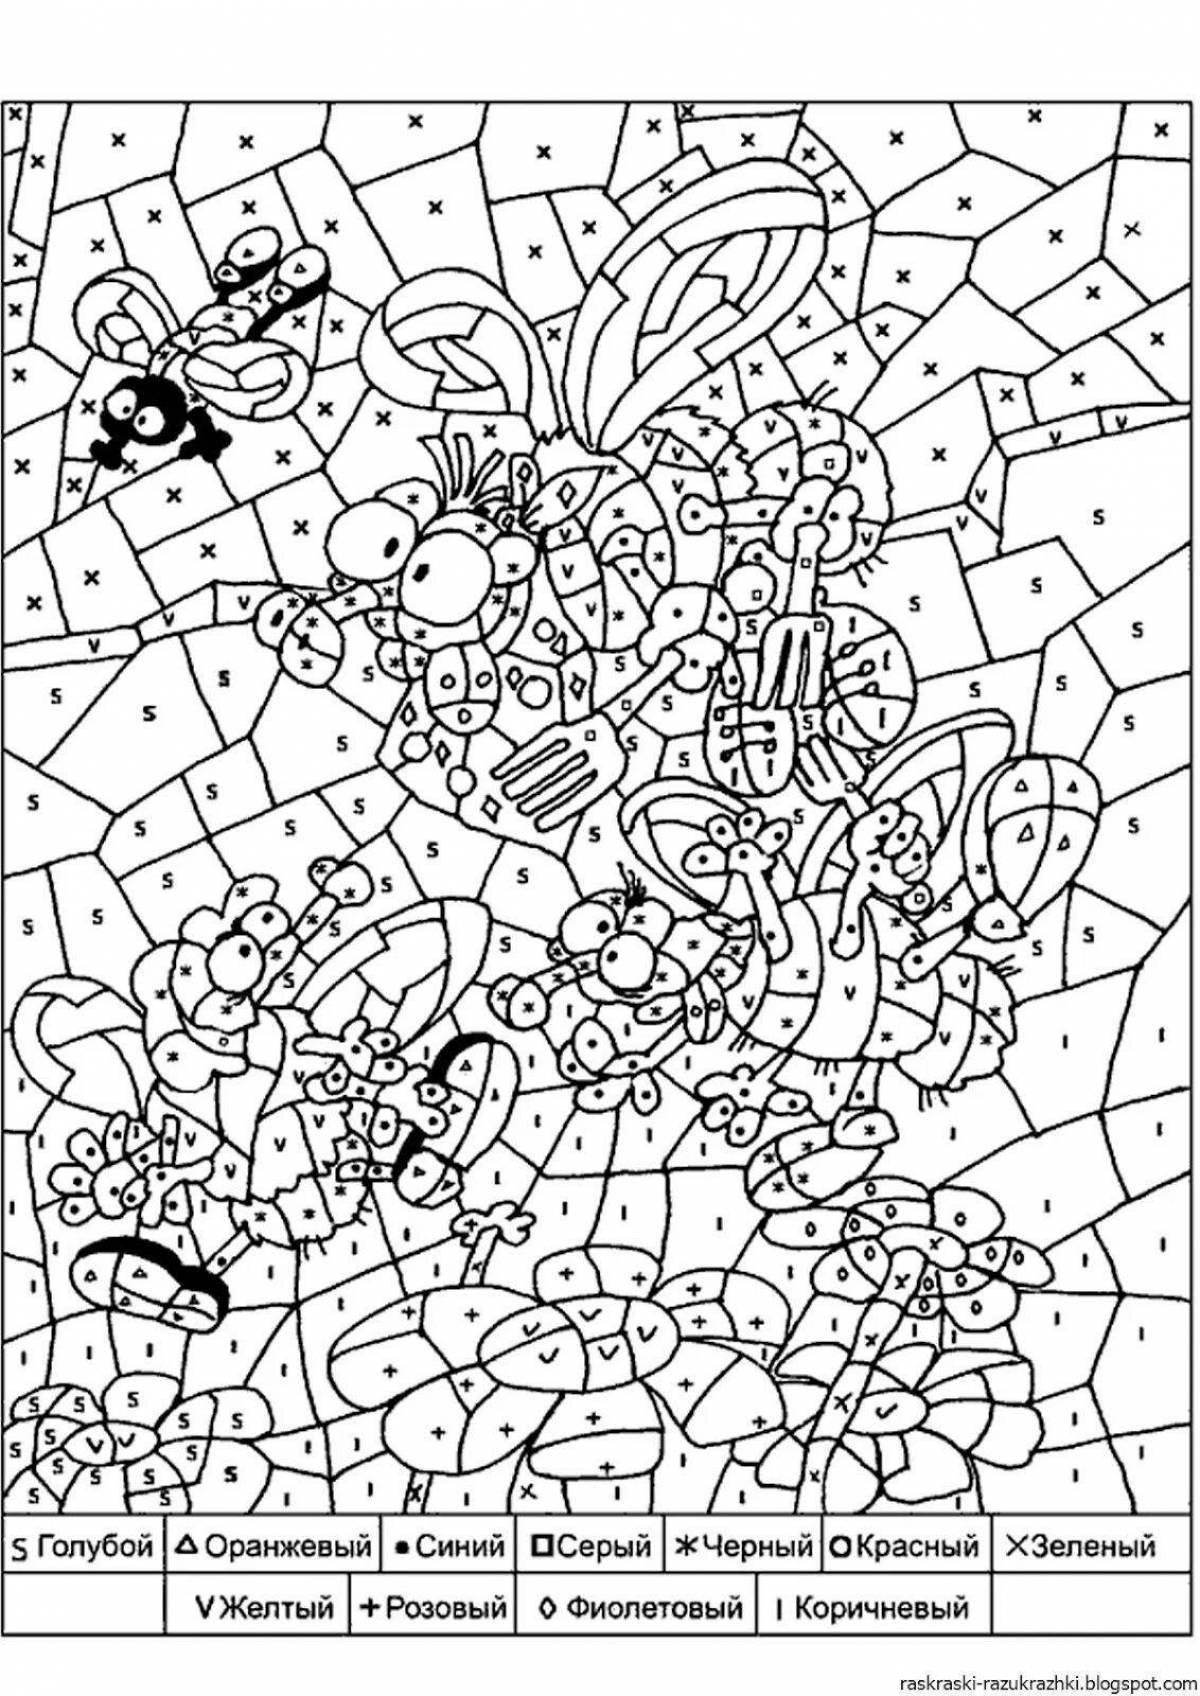 Invitation for coloring by numbers for everyone